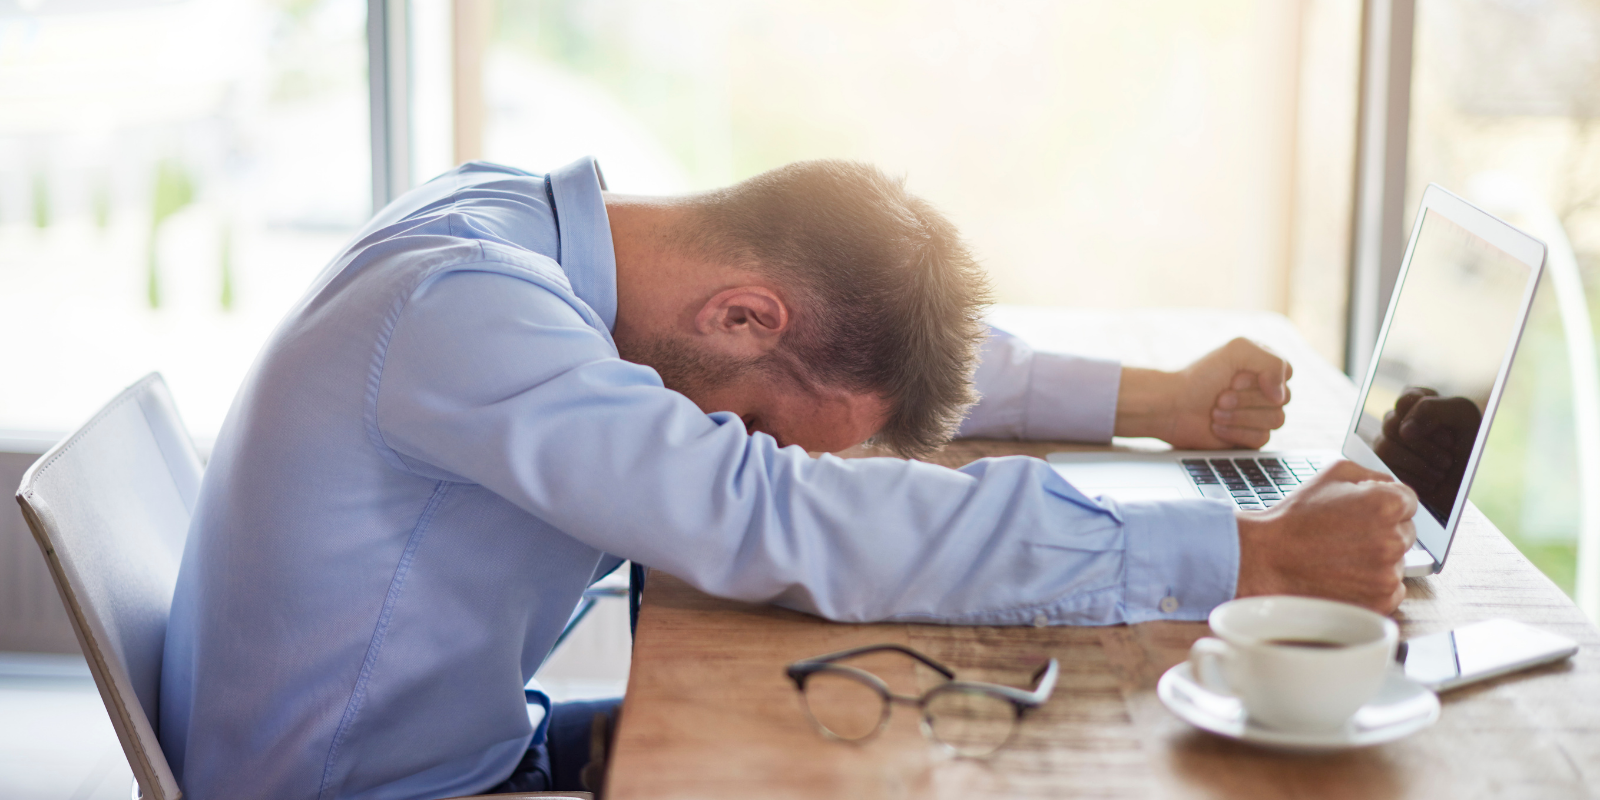 Man showing stress with his head down on a desk